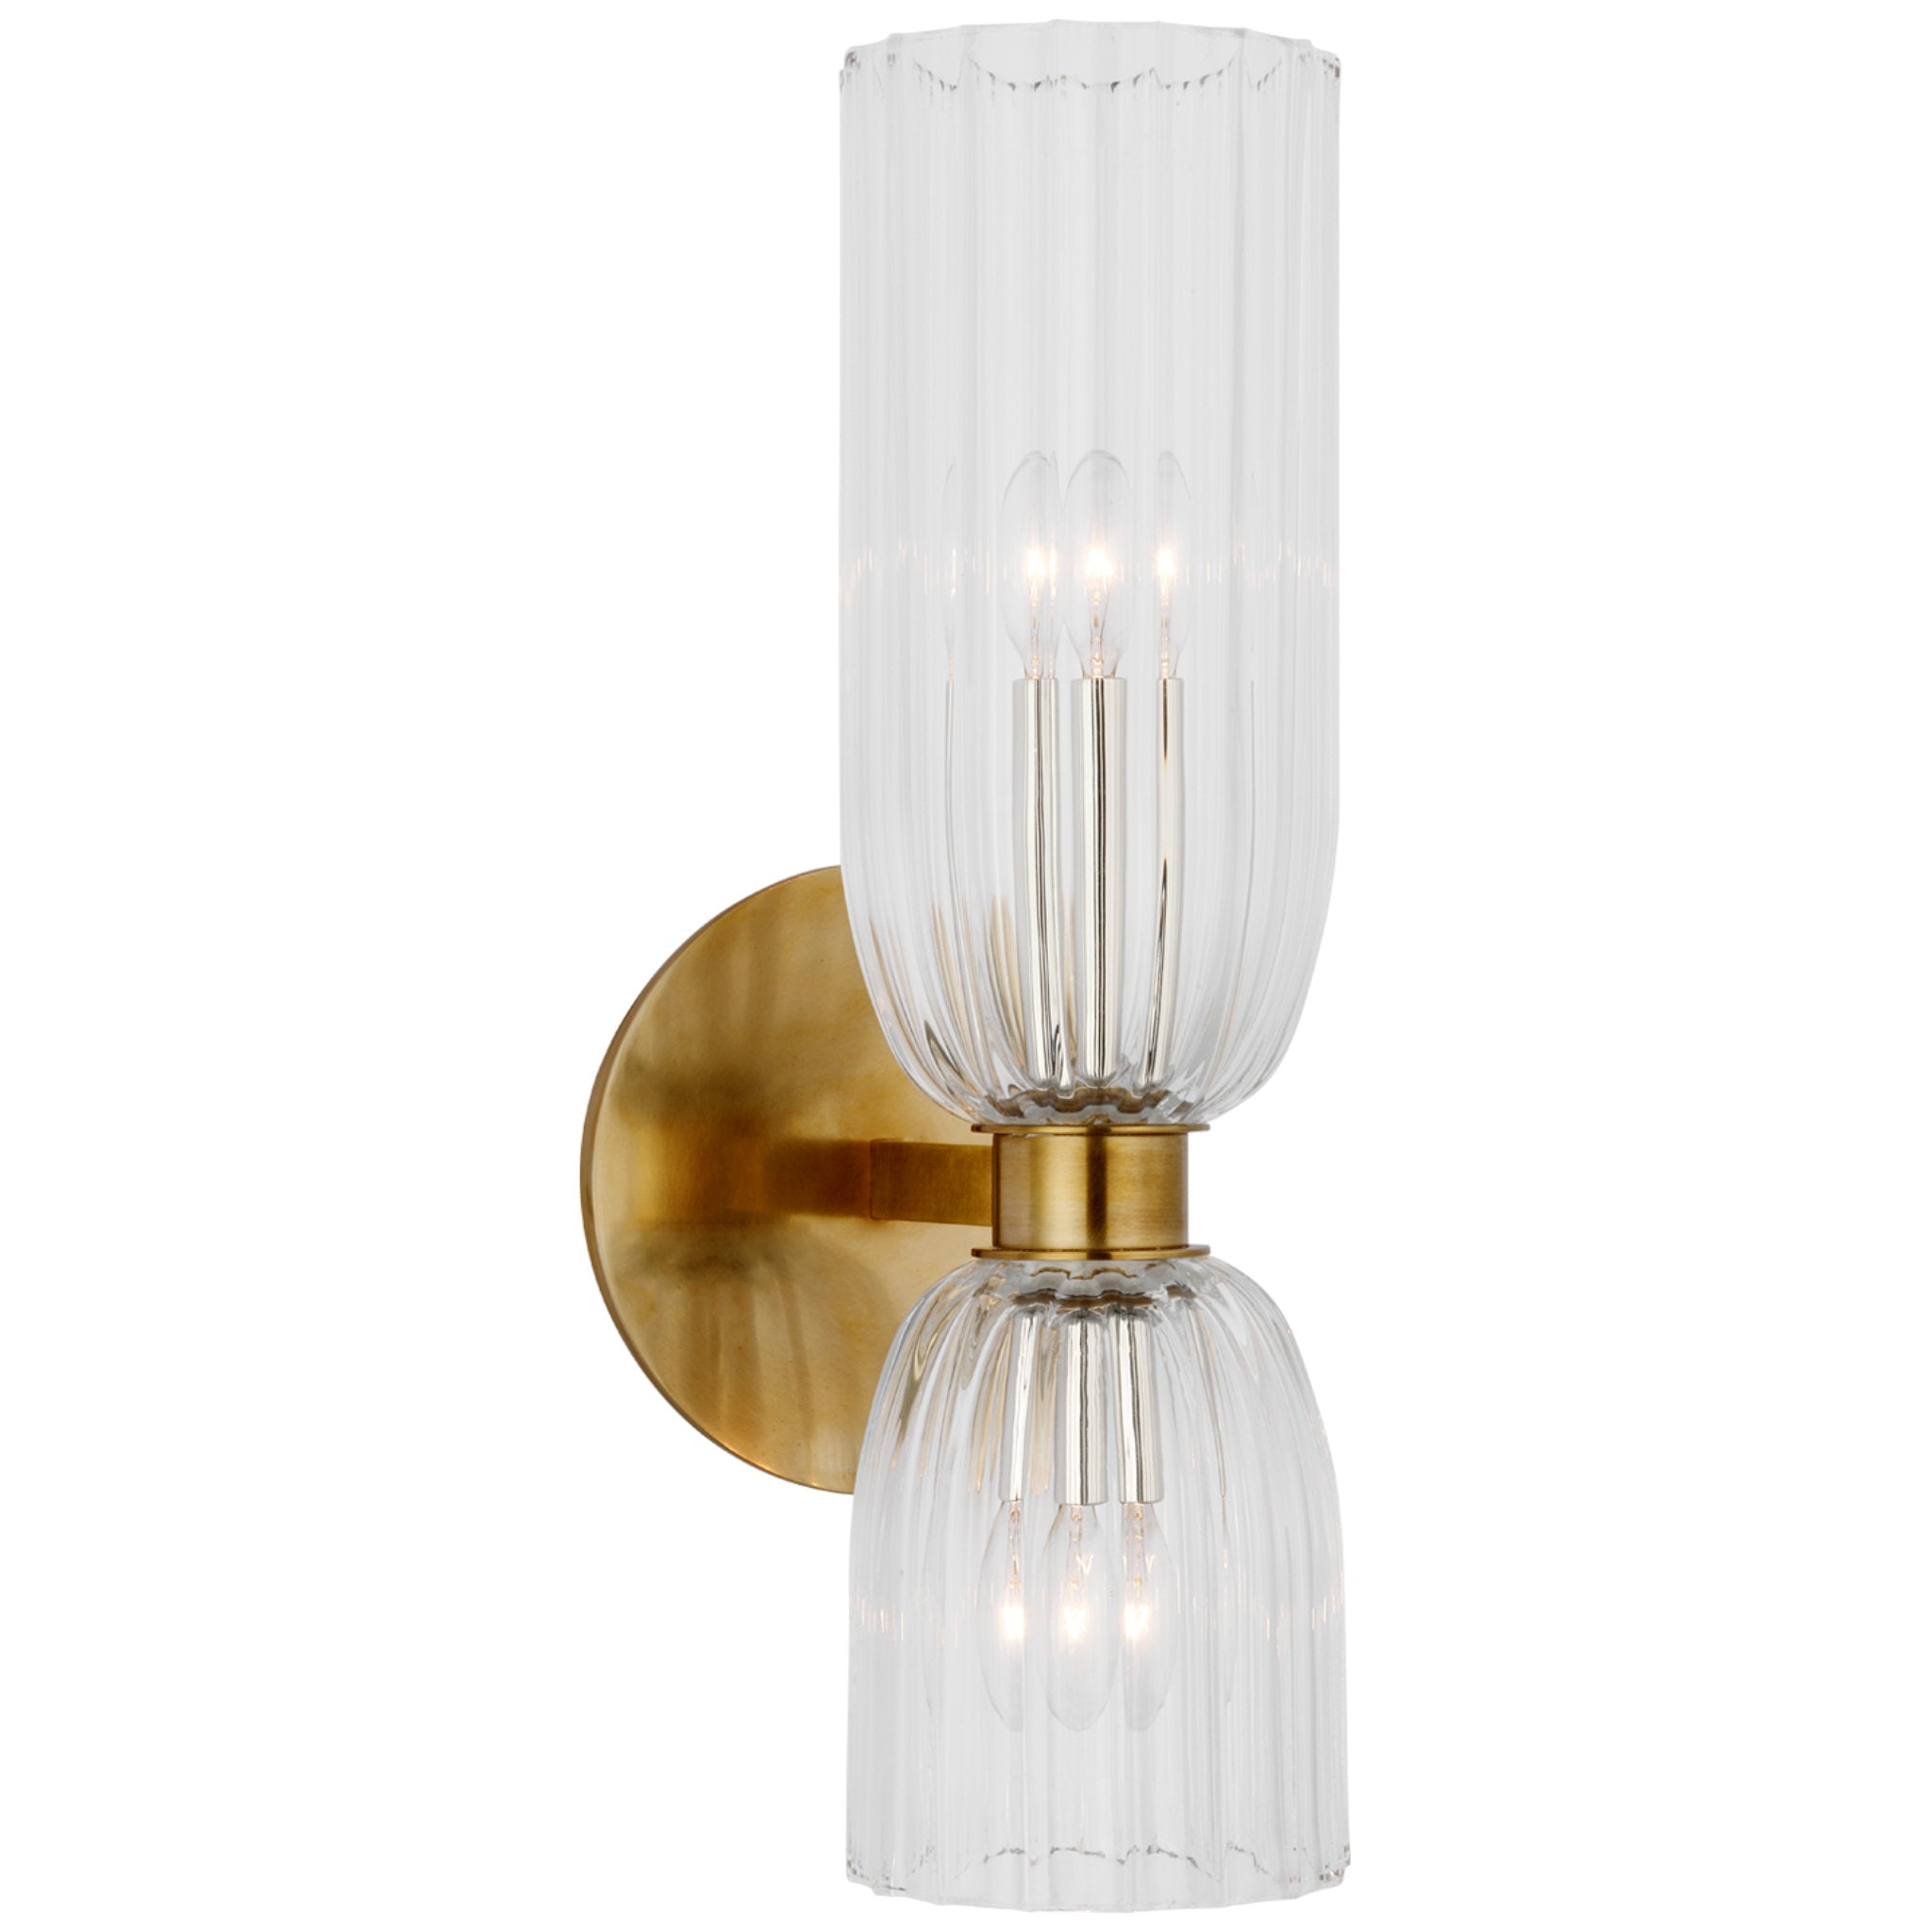 AERIN Asalea 16" Double Bath Sconce in Hand-Rubbed Antique Brass with Clear Glass